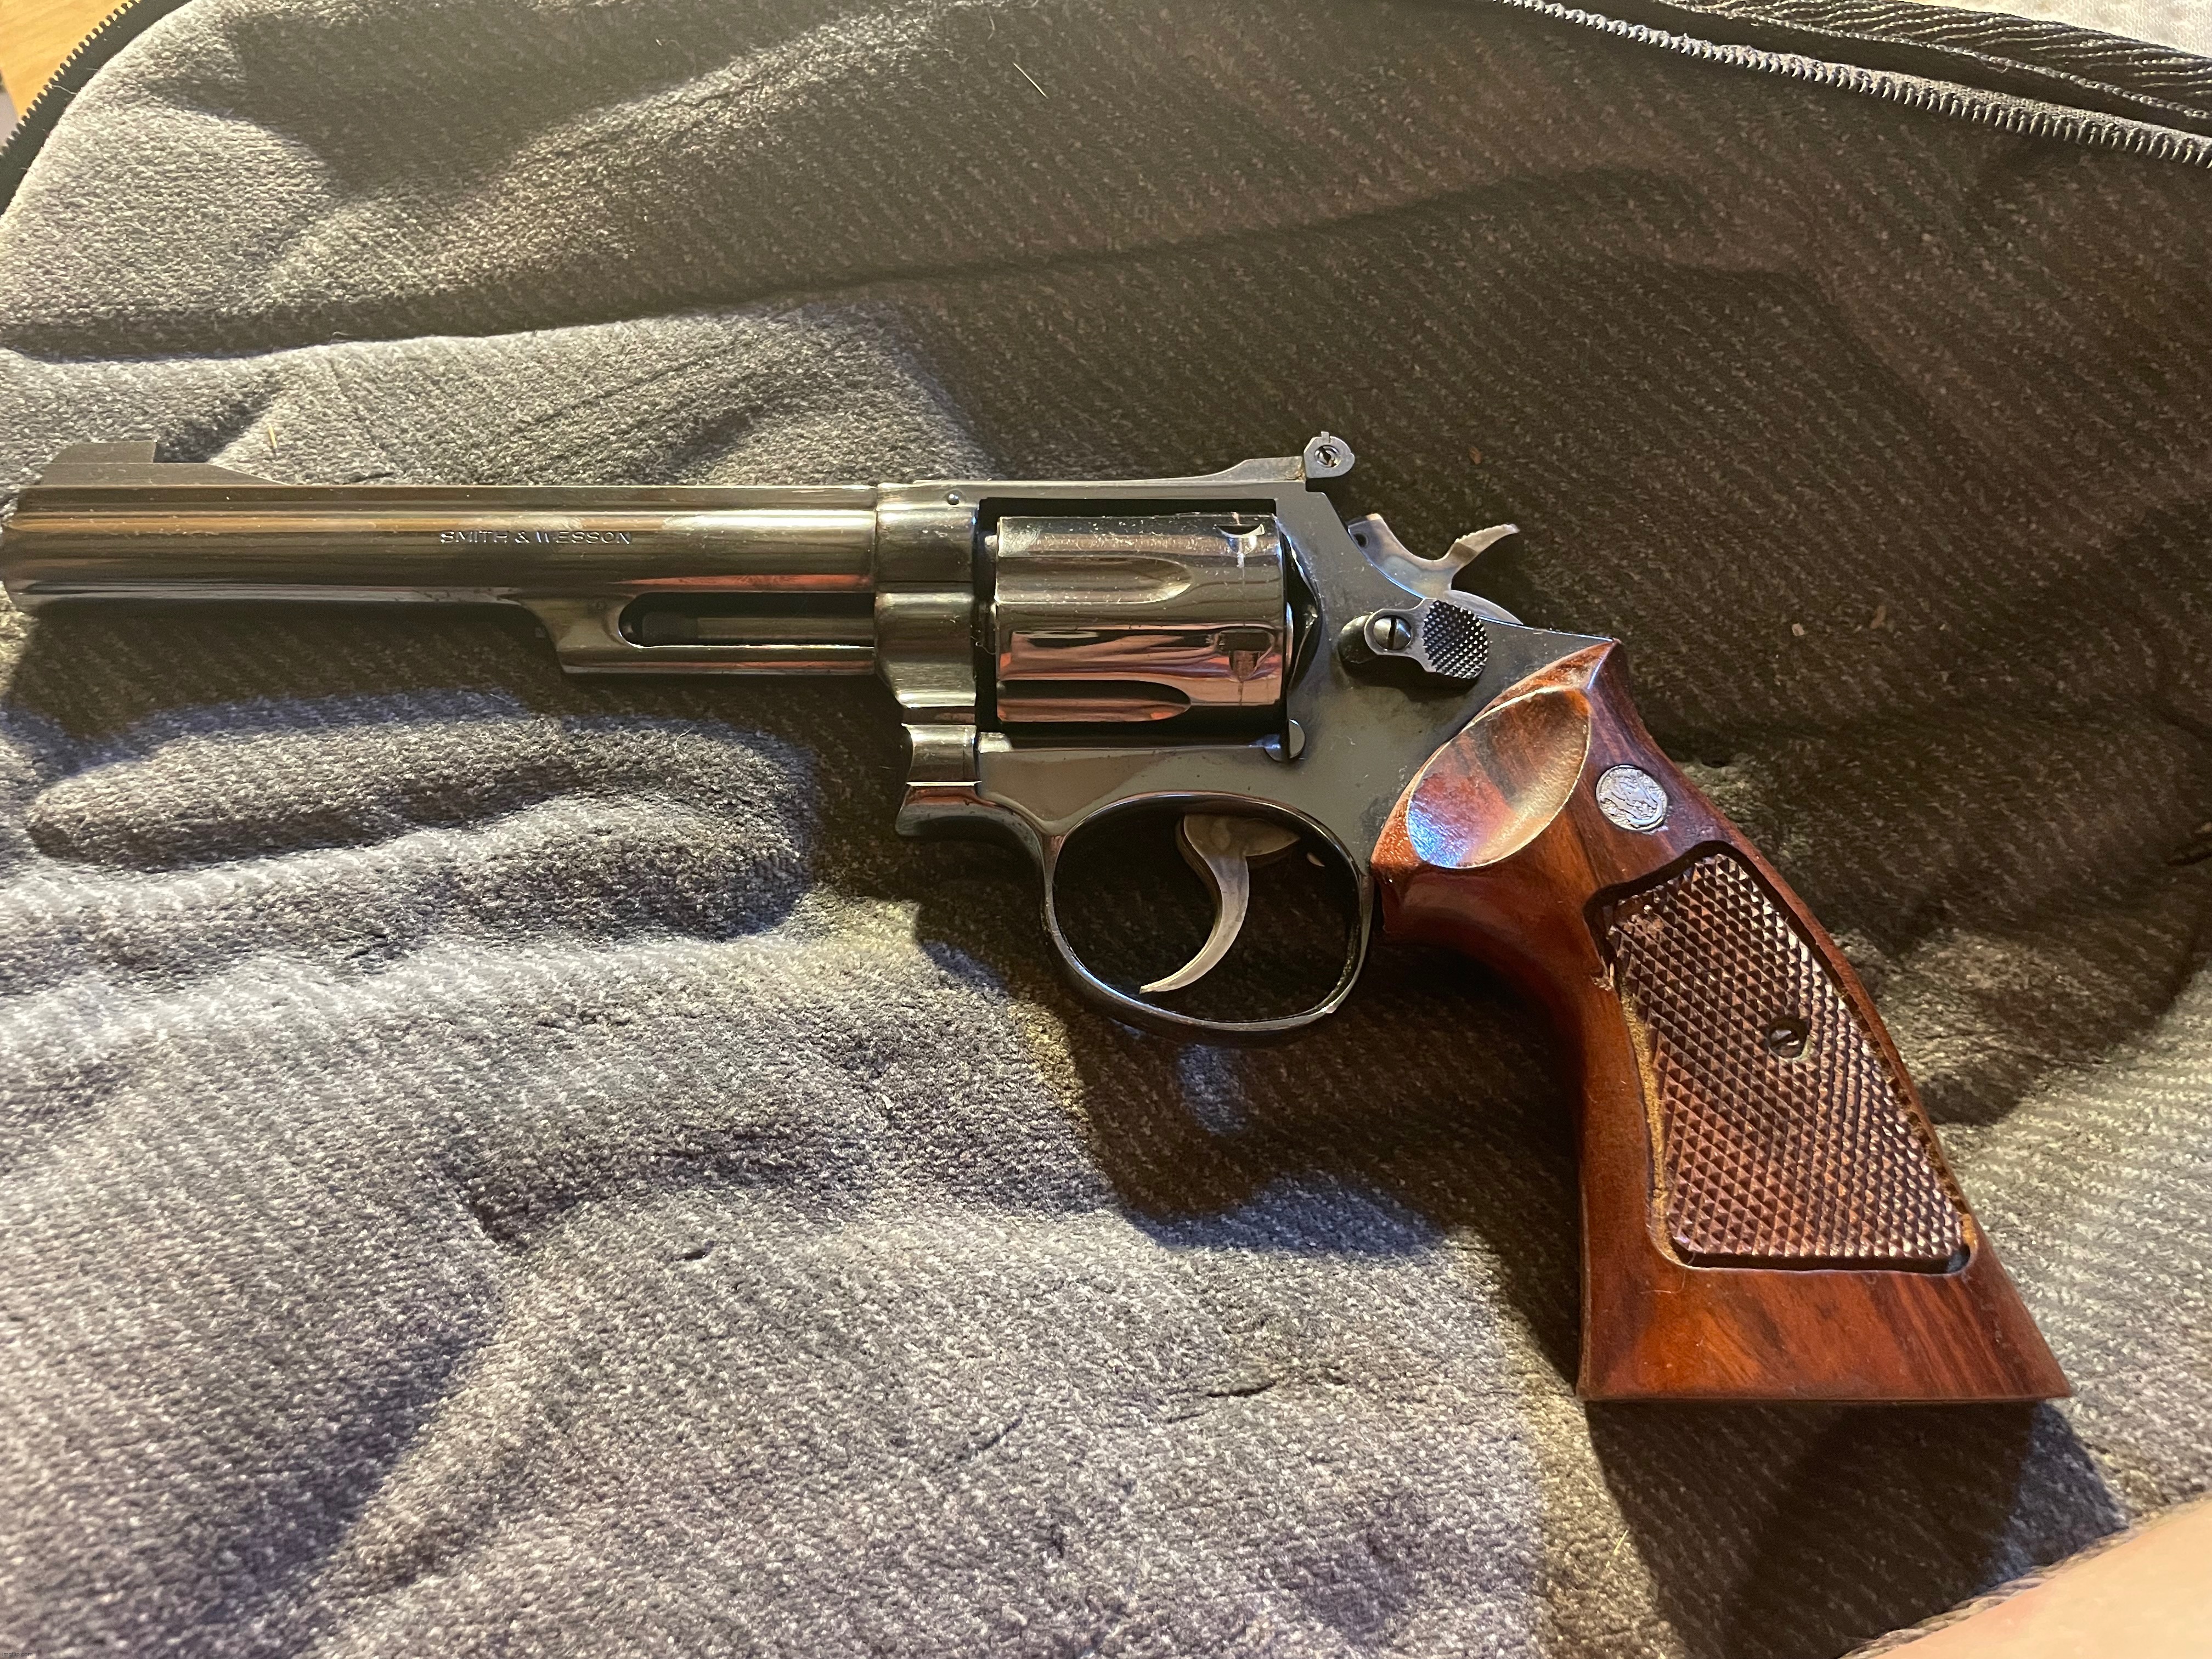 My dads old Smith & Wesson revolver | image tagged in guns,photography,photos | made w/ Imgflip meme maker